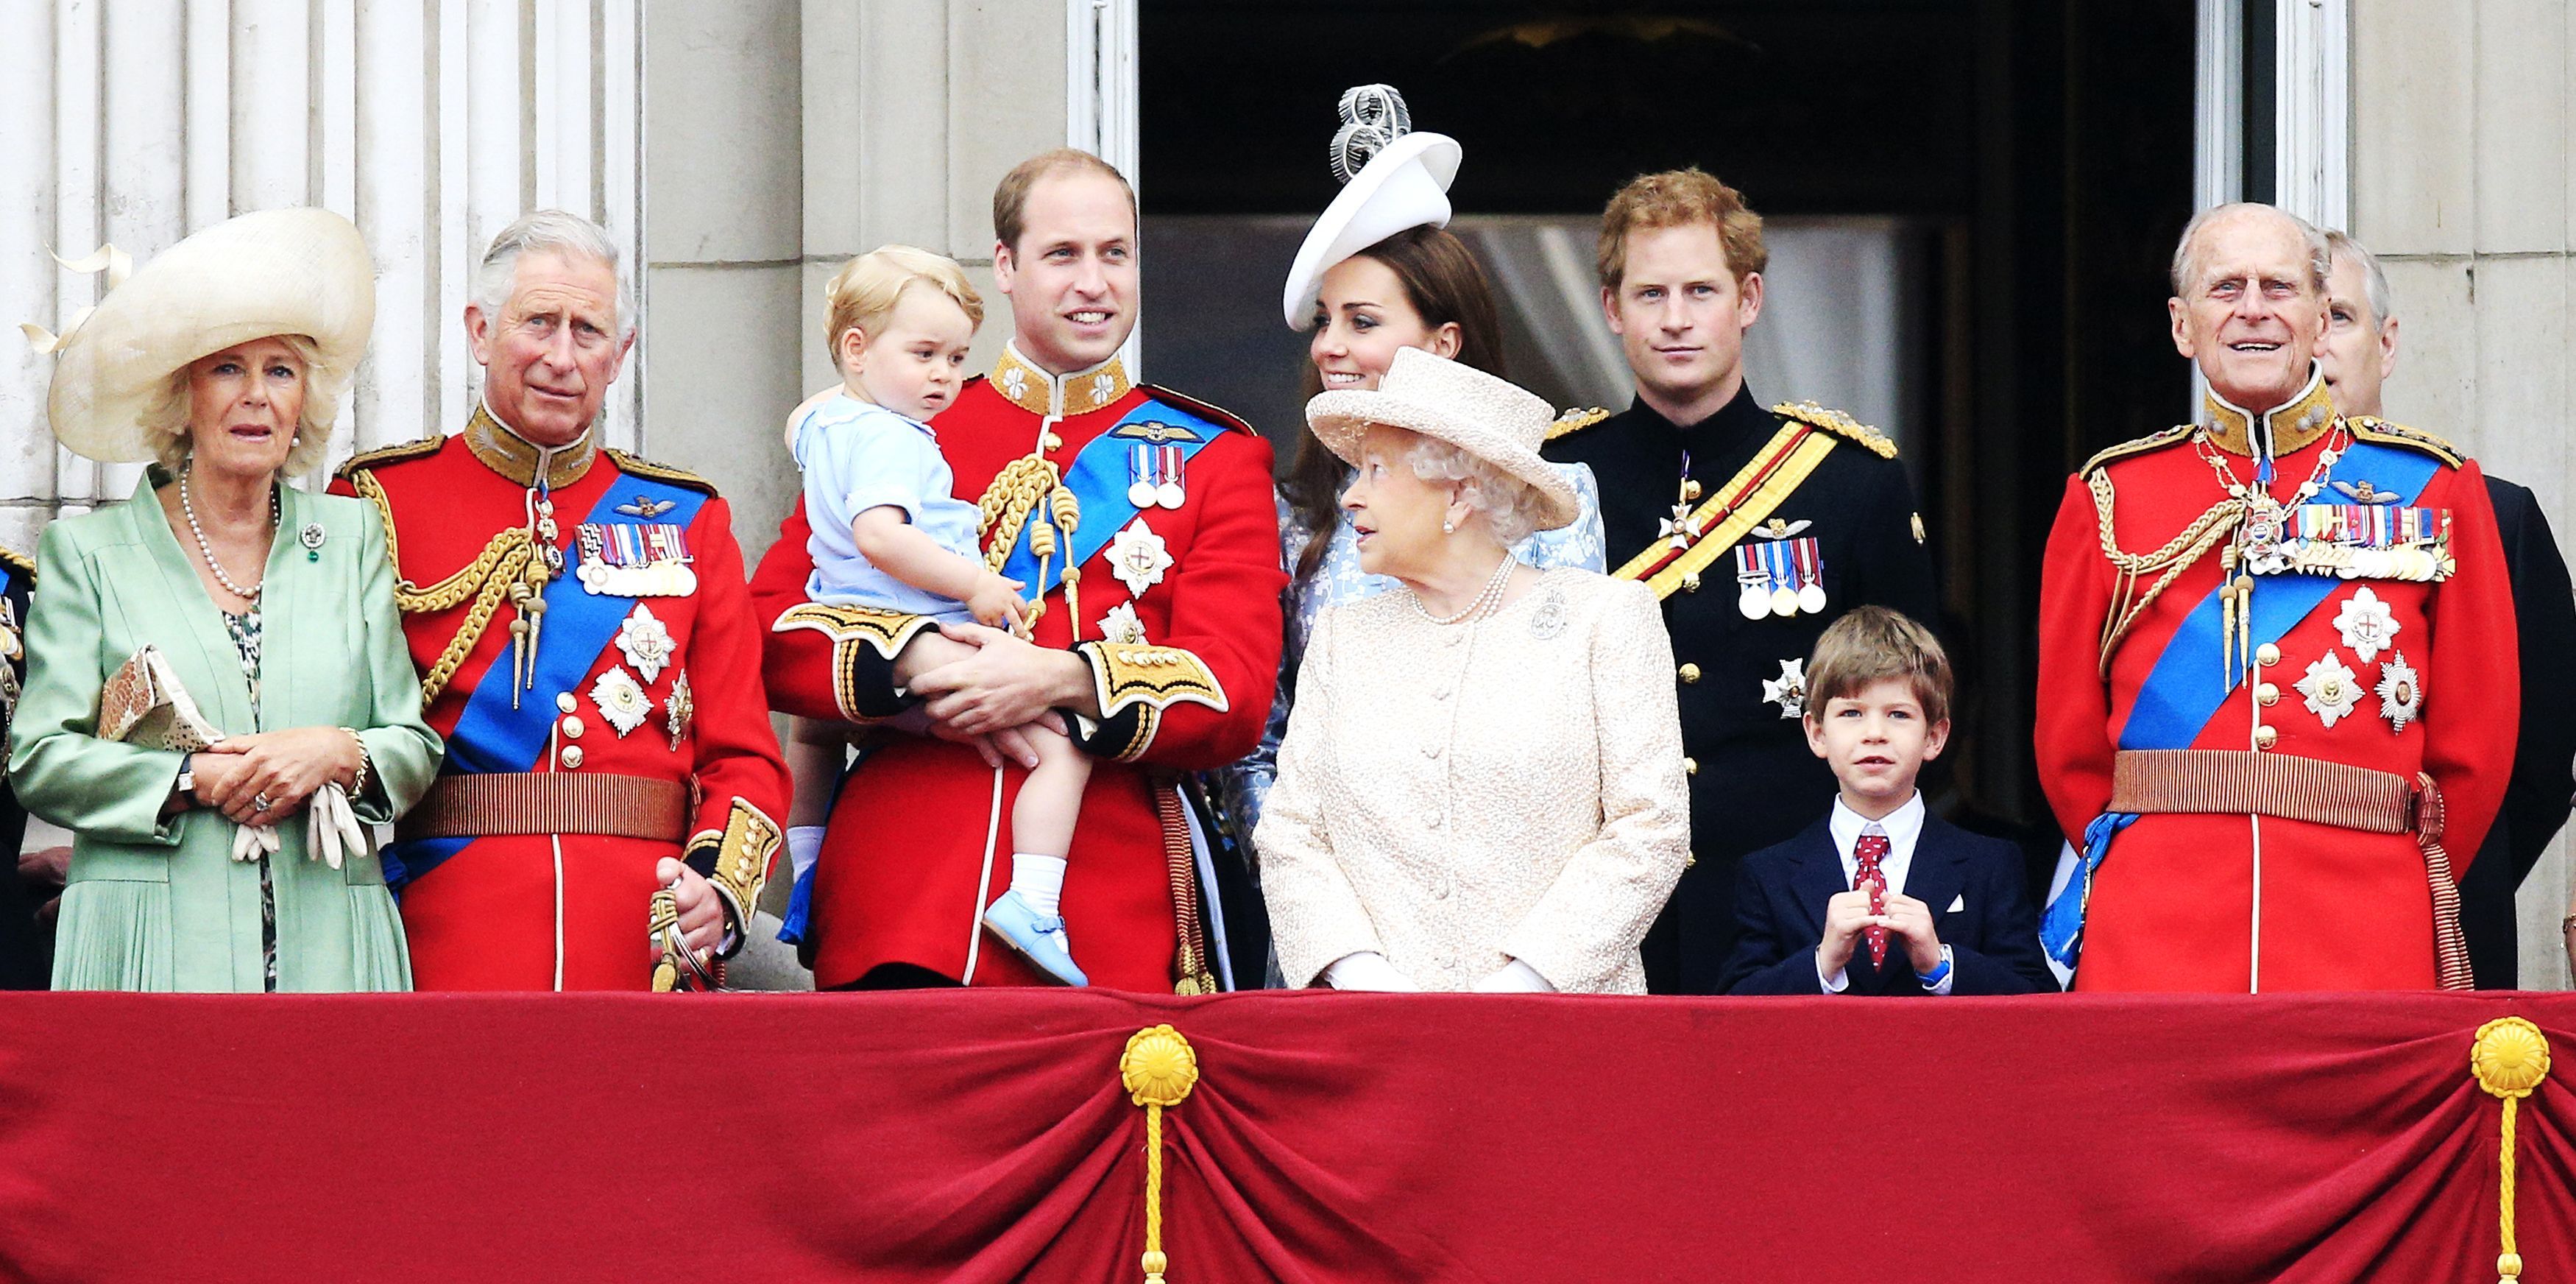 The Duchess of Cornwall, the Prince of Wales, Prince George, the Duke and Duchess of Cambridge, Queen Elizabeth II, Prince Harry, James Viscount Severn, the Duke of Edinburgh and the Duke of York on the balcony at Buckingham Palace following Trooping the Colour at Horse Guards Parade, London, in 2015